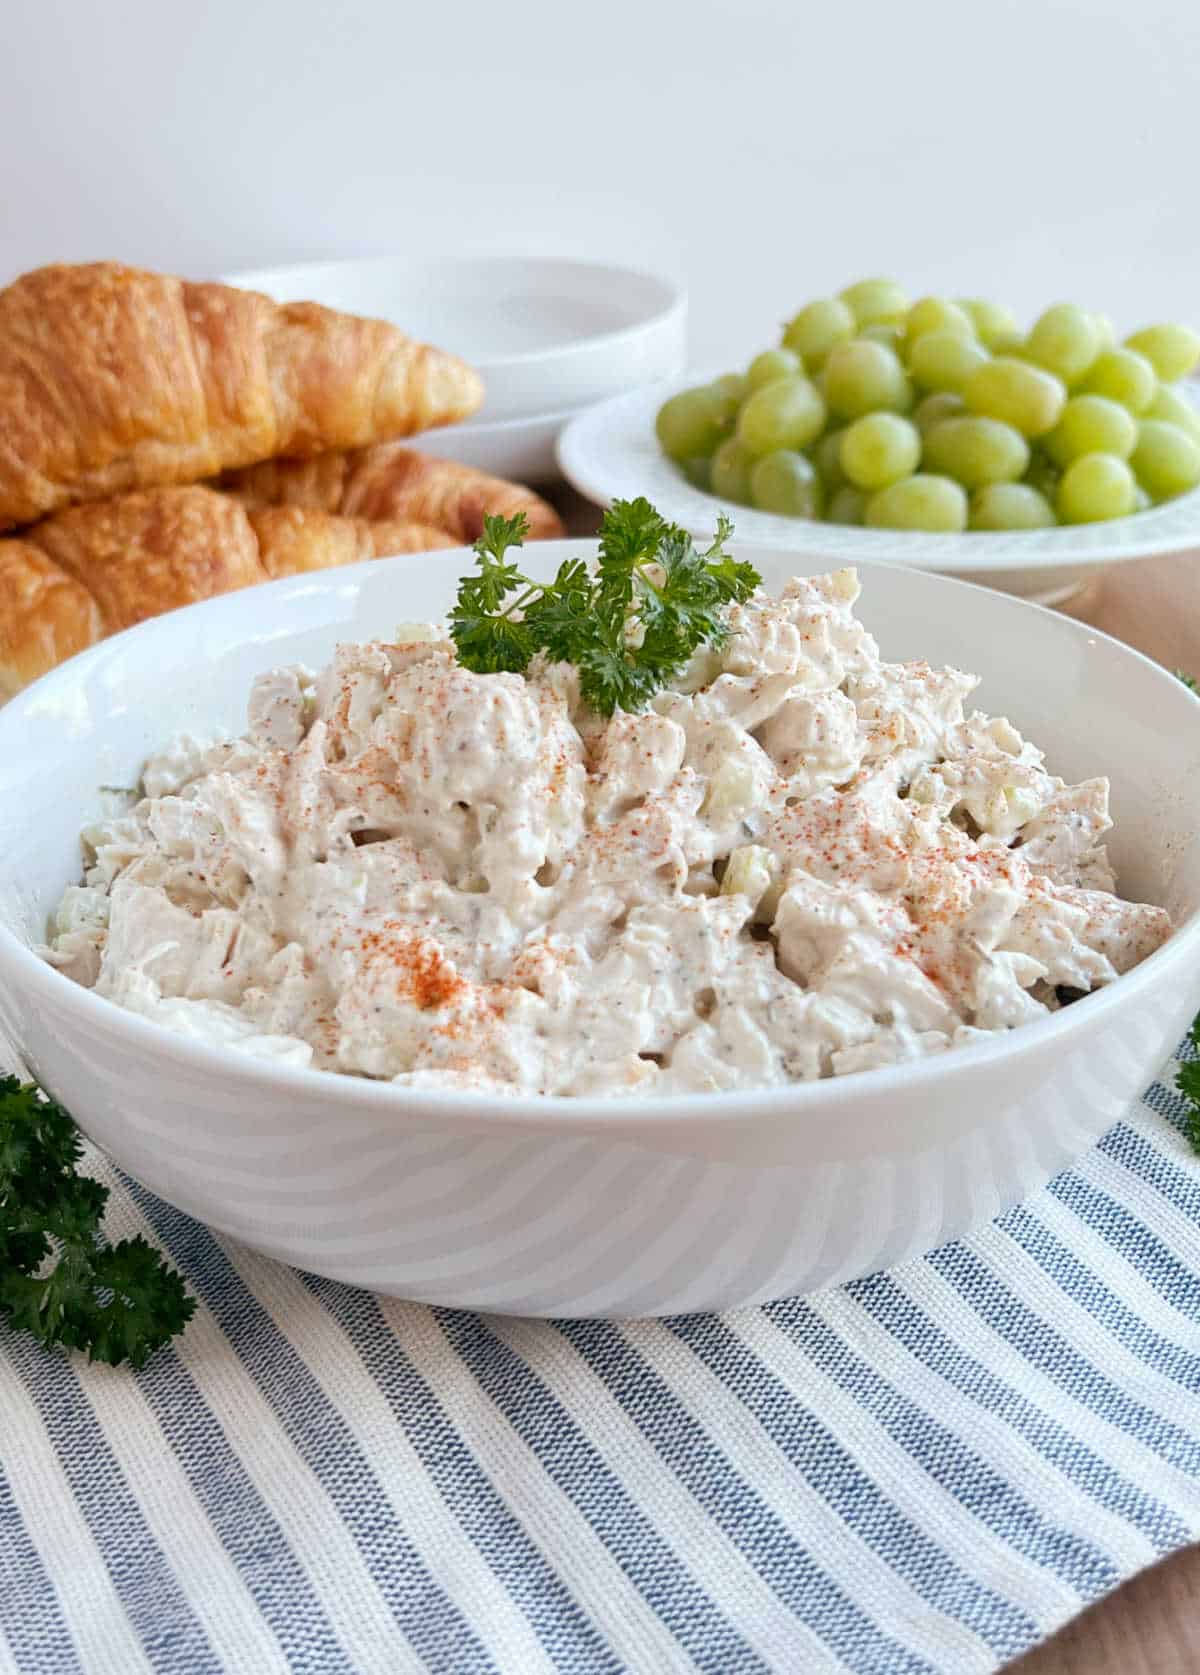 simple chicken salad bowl with croissants and grapes on the table.